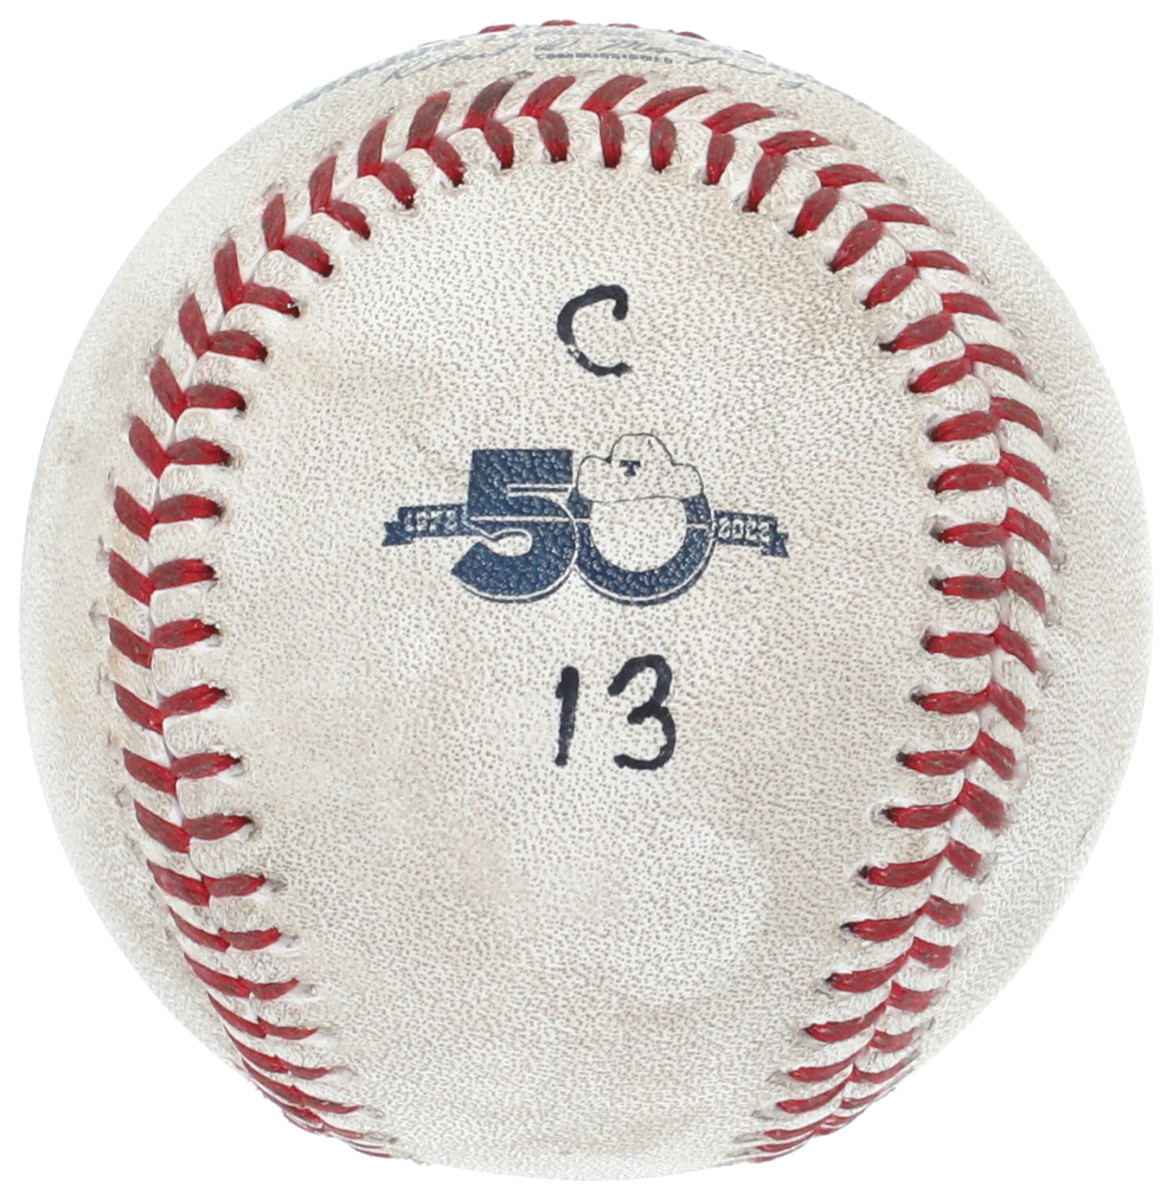 The baseball that Aaron Judge hit for his record 62nd home run.